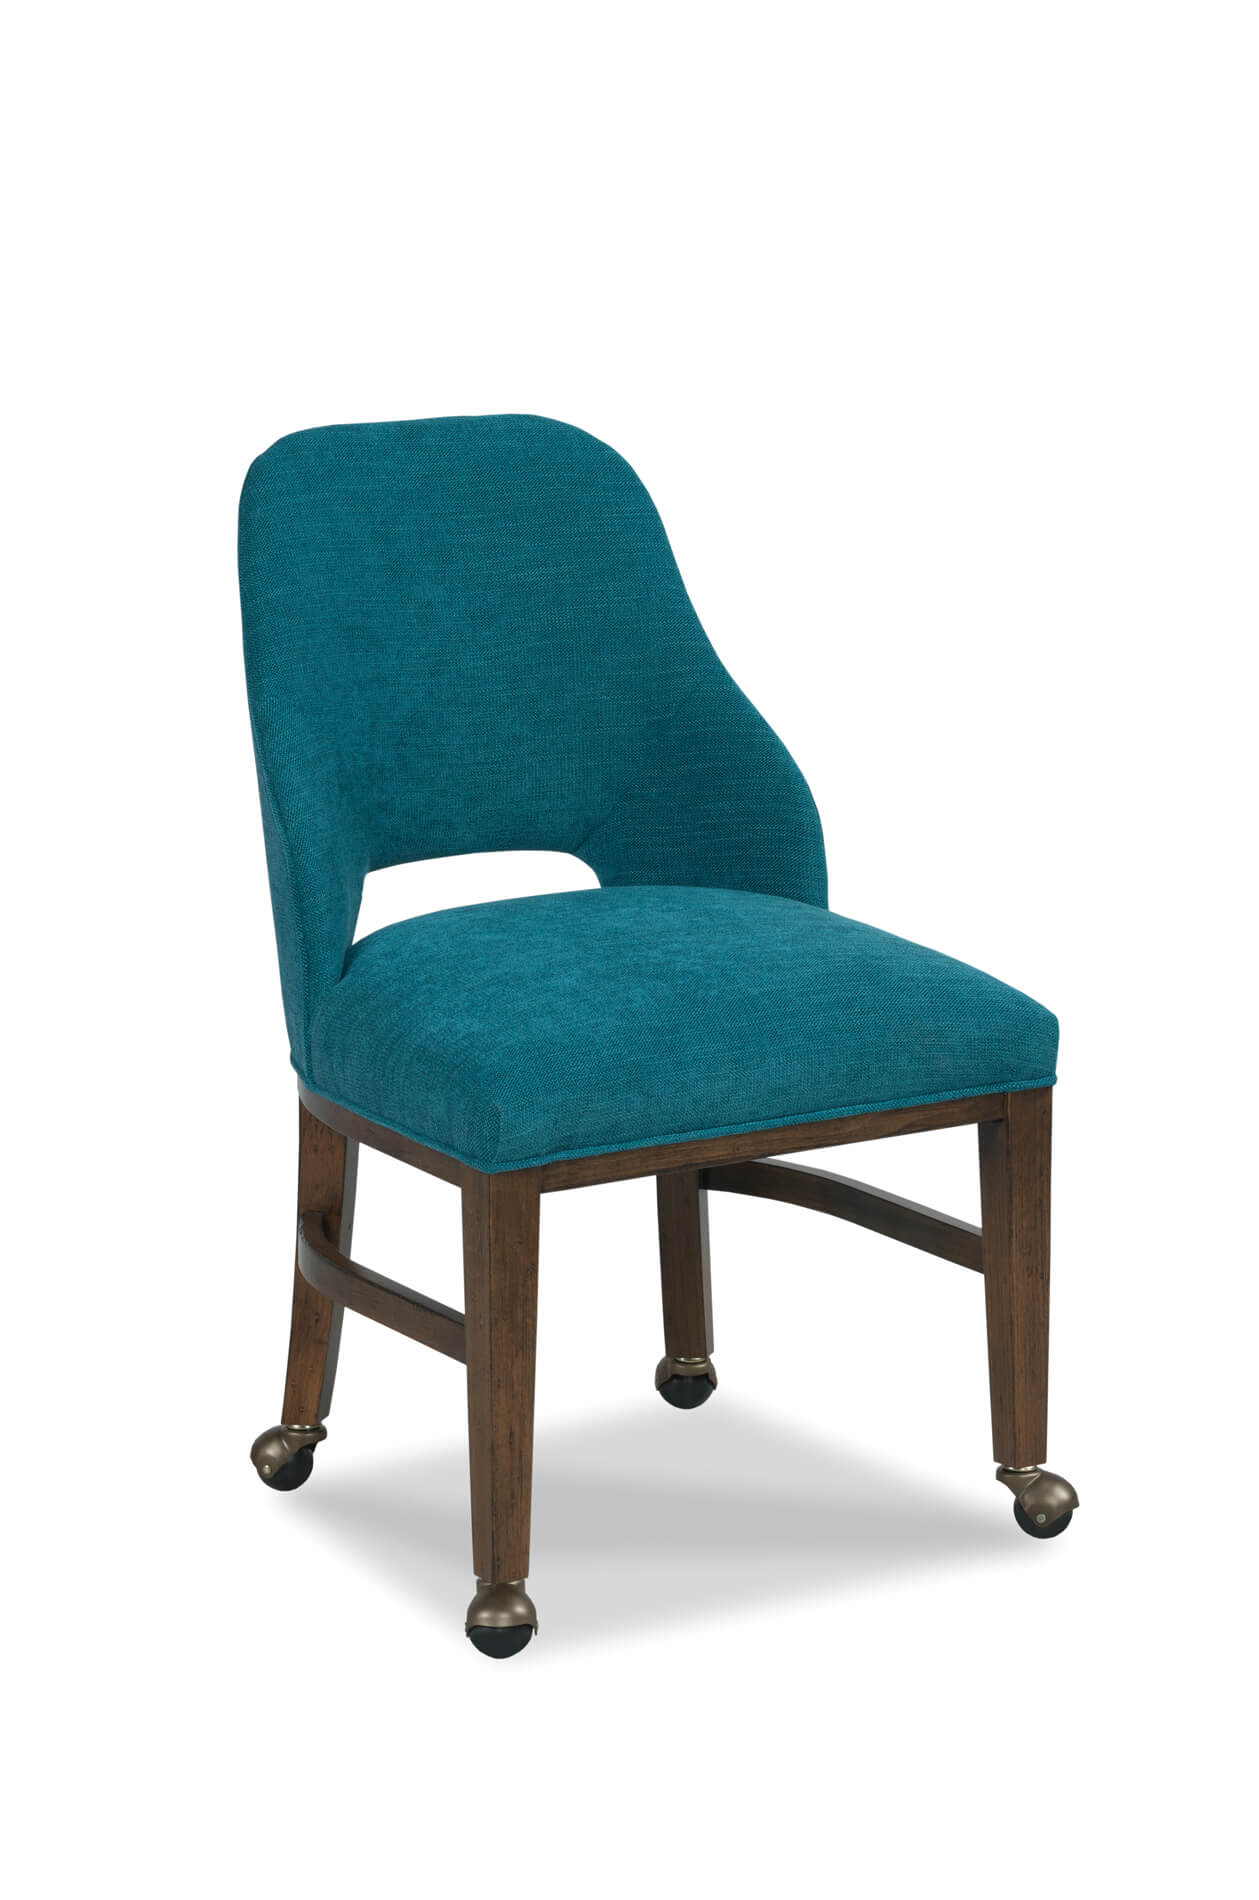 Darien Upholstered Dining Chair, Padded Dining Room Chairs With Casters